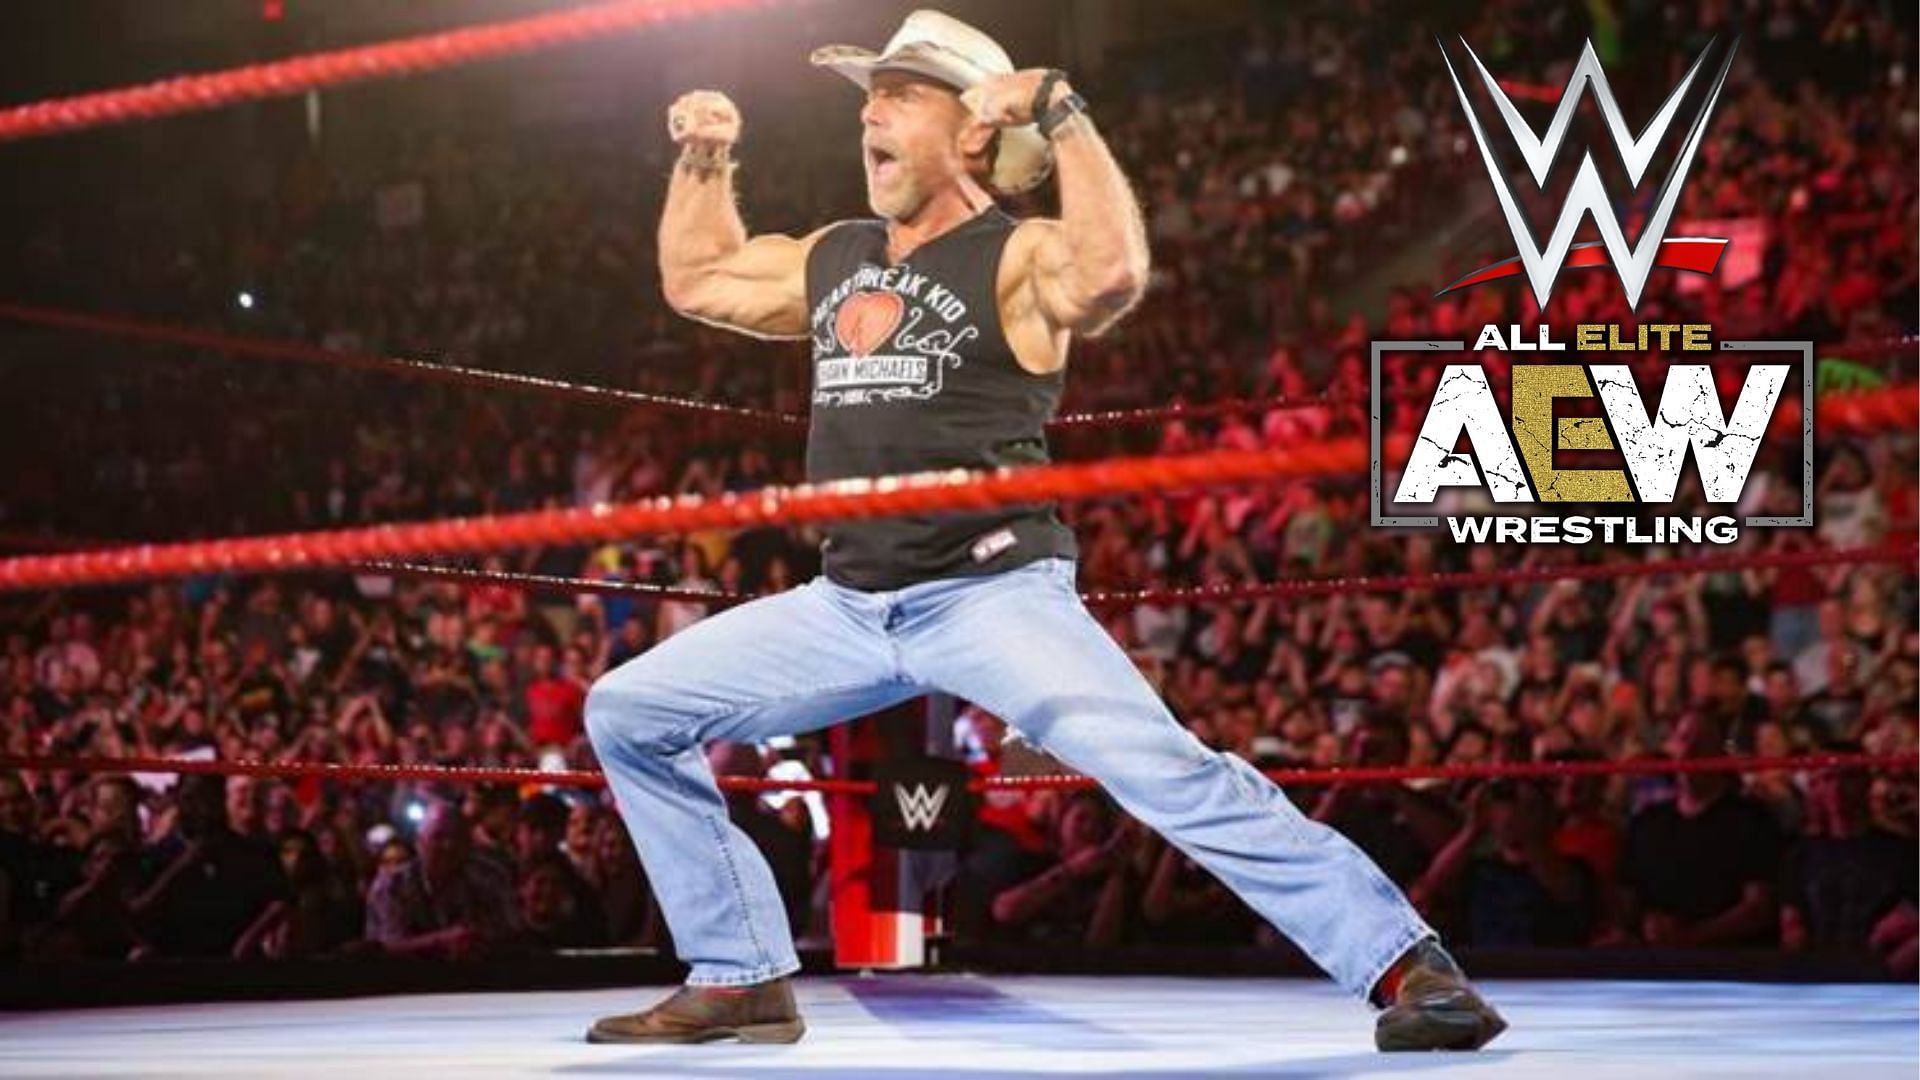 Shawn Michaels is apparently admired by an AEW star